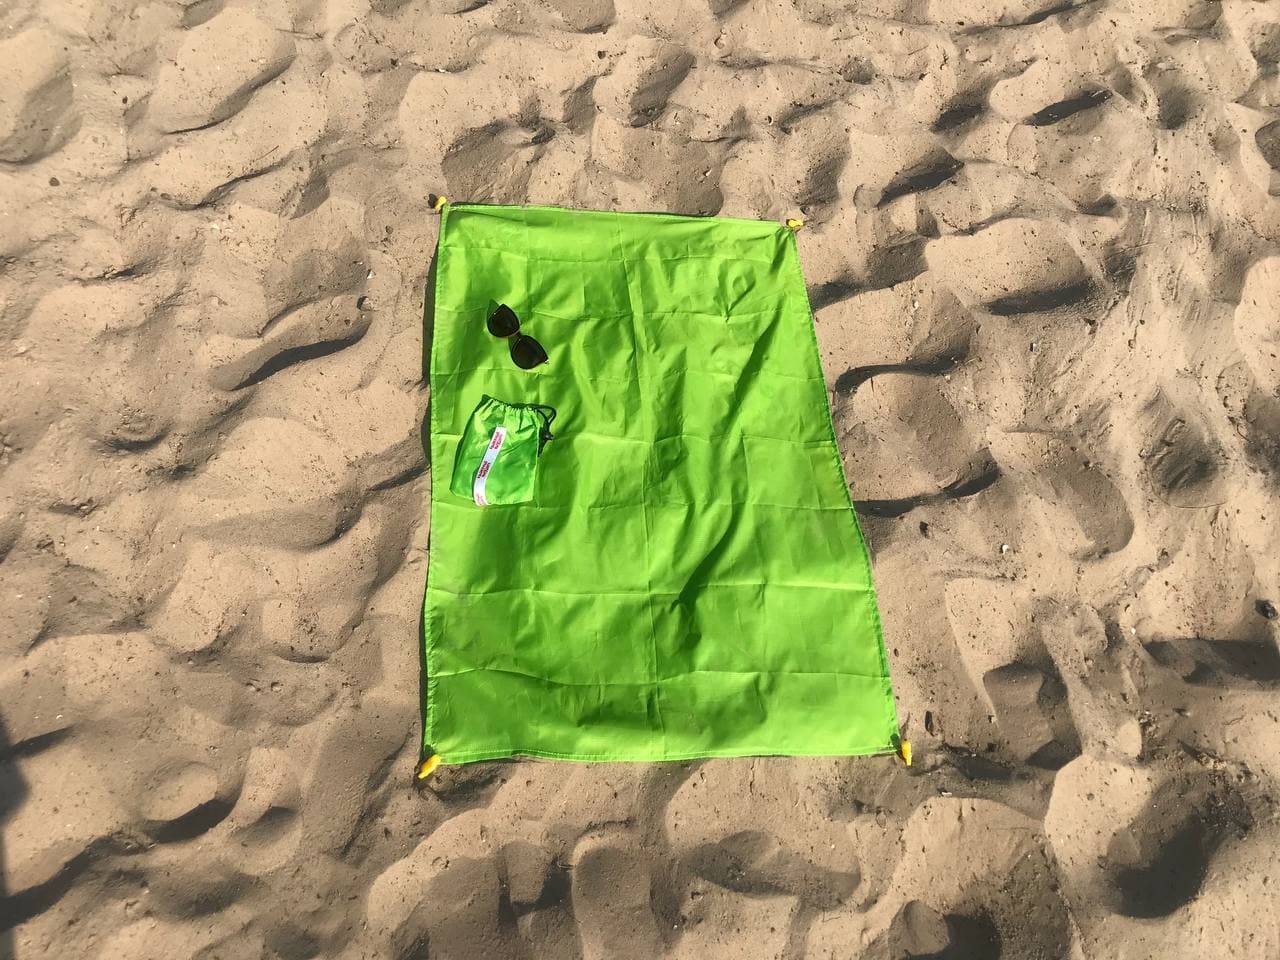 Waterproof mat for beach and picnic